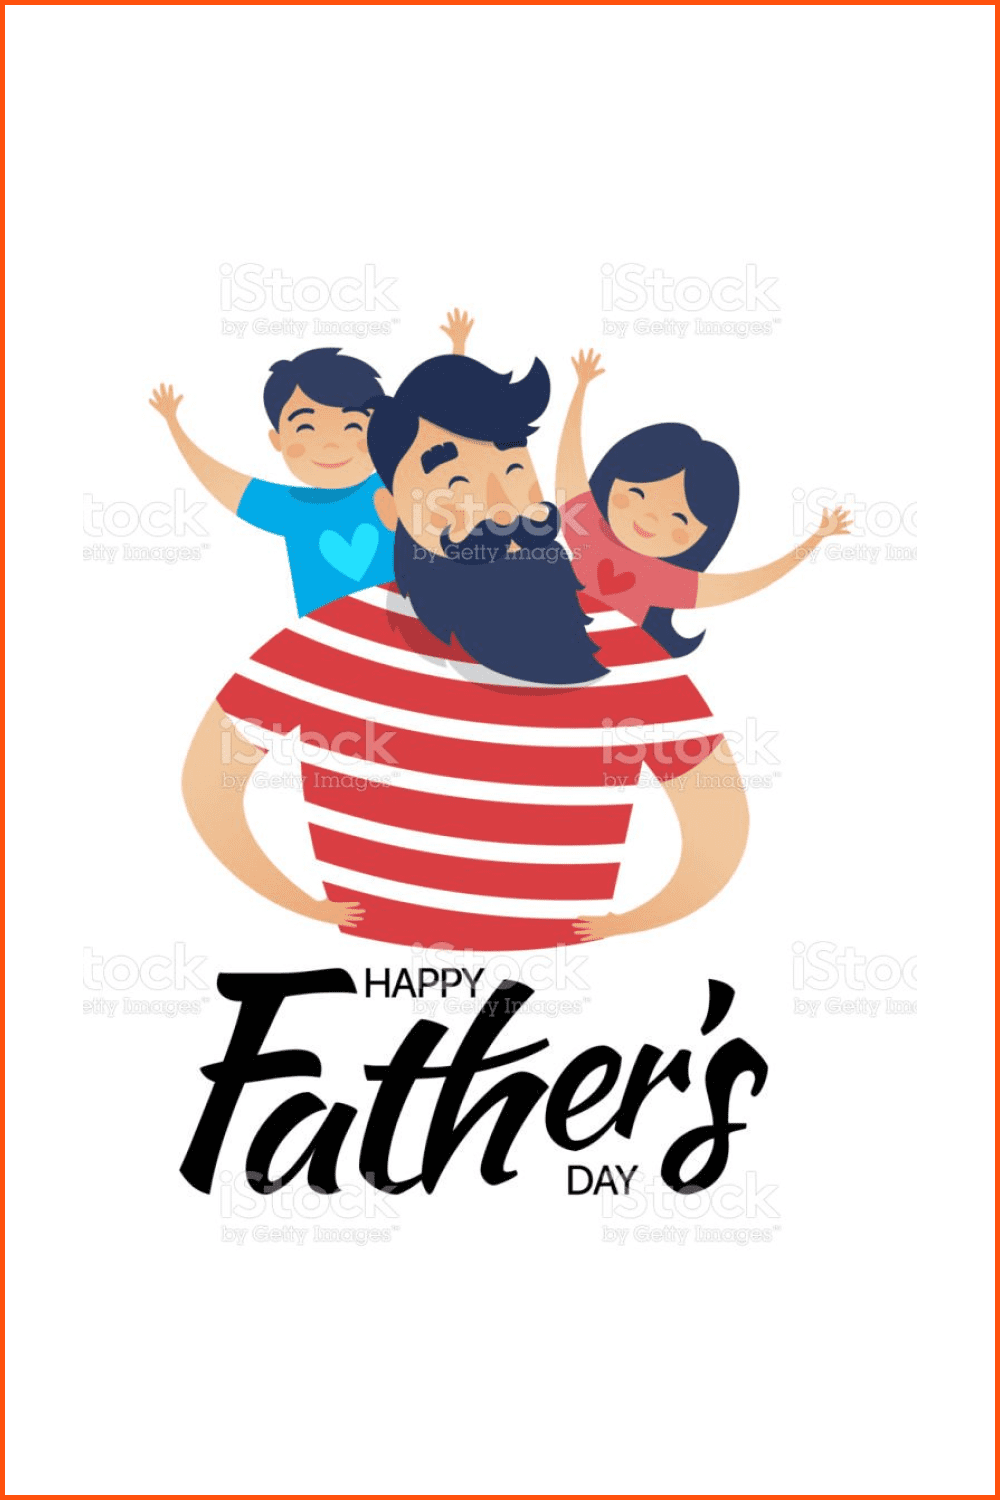 Father’s Day Illustration.